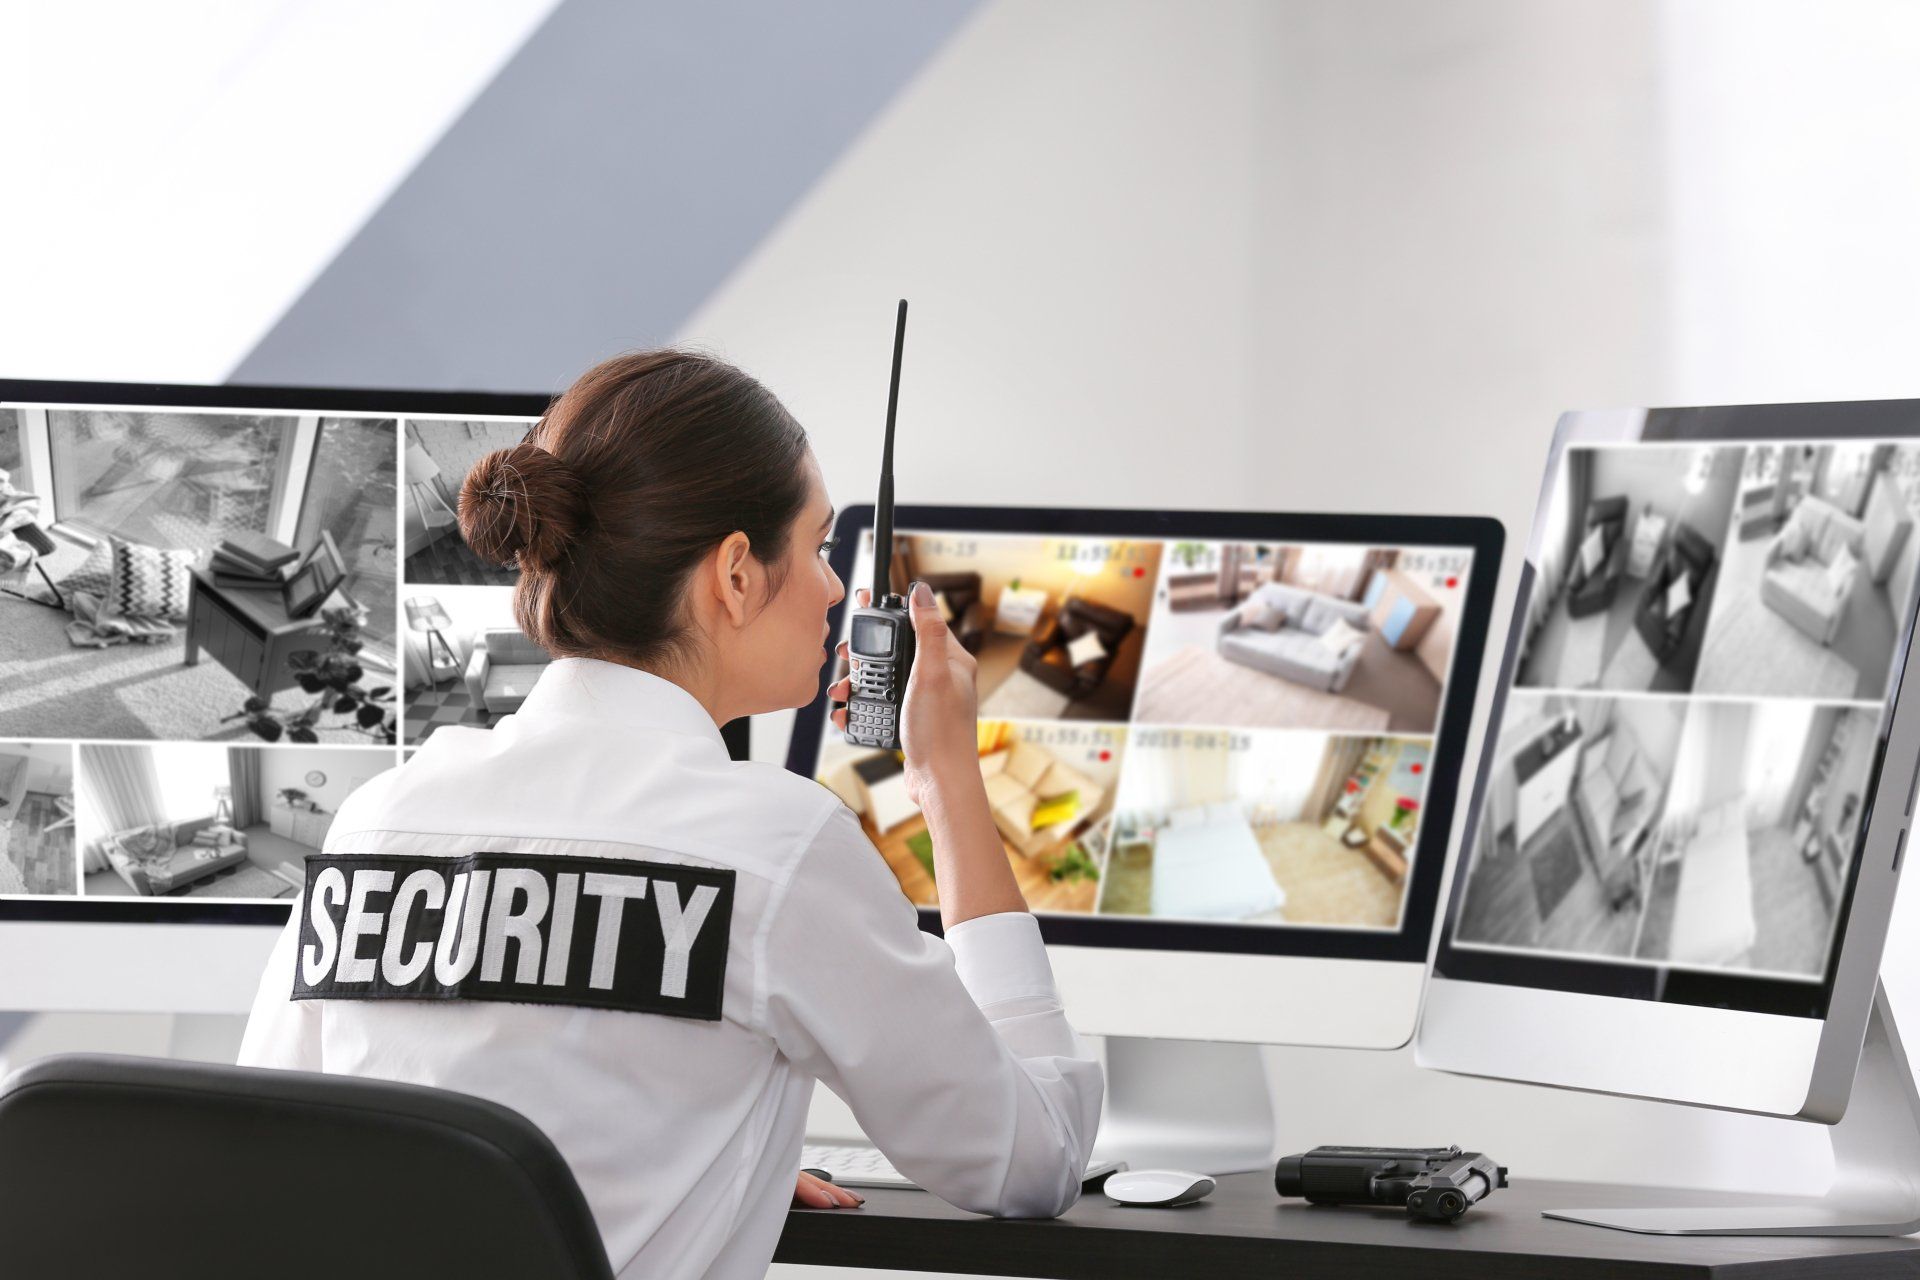 https://lirp.cdn-website.com/5fdc58b4/dms3rep/multi/opt/stock-photo-safety-of-private-property-and-modern-technology-safeguard-monitoring-home-security-cameras-566594011-1920w.jpg